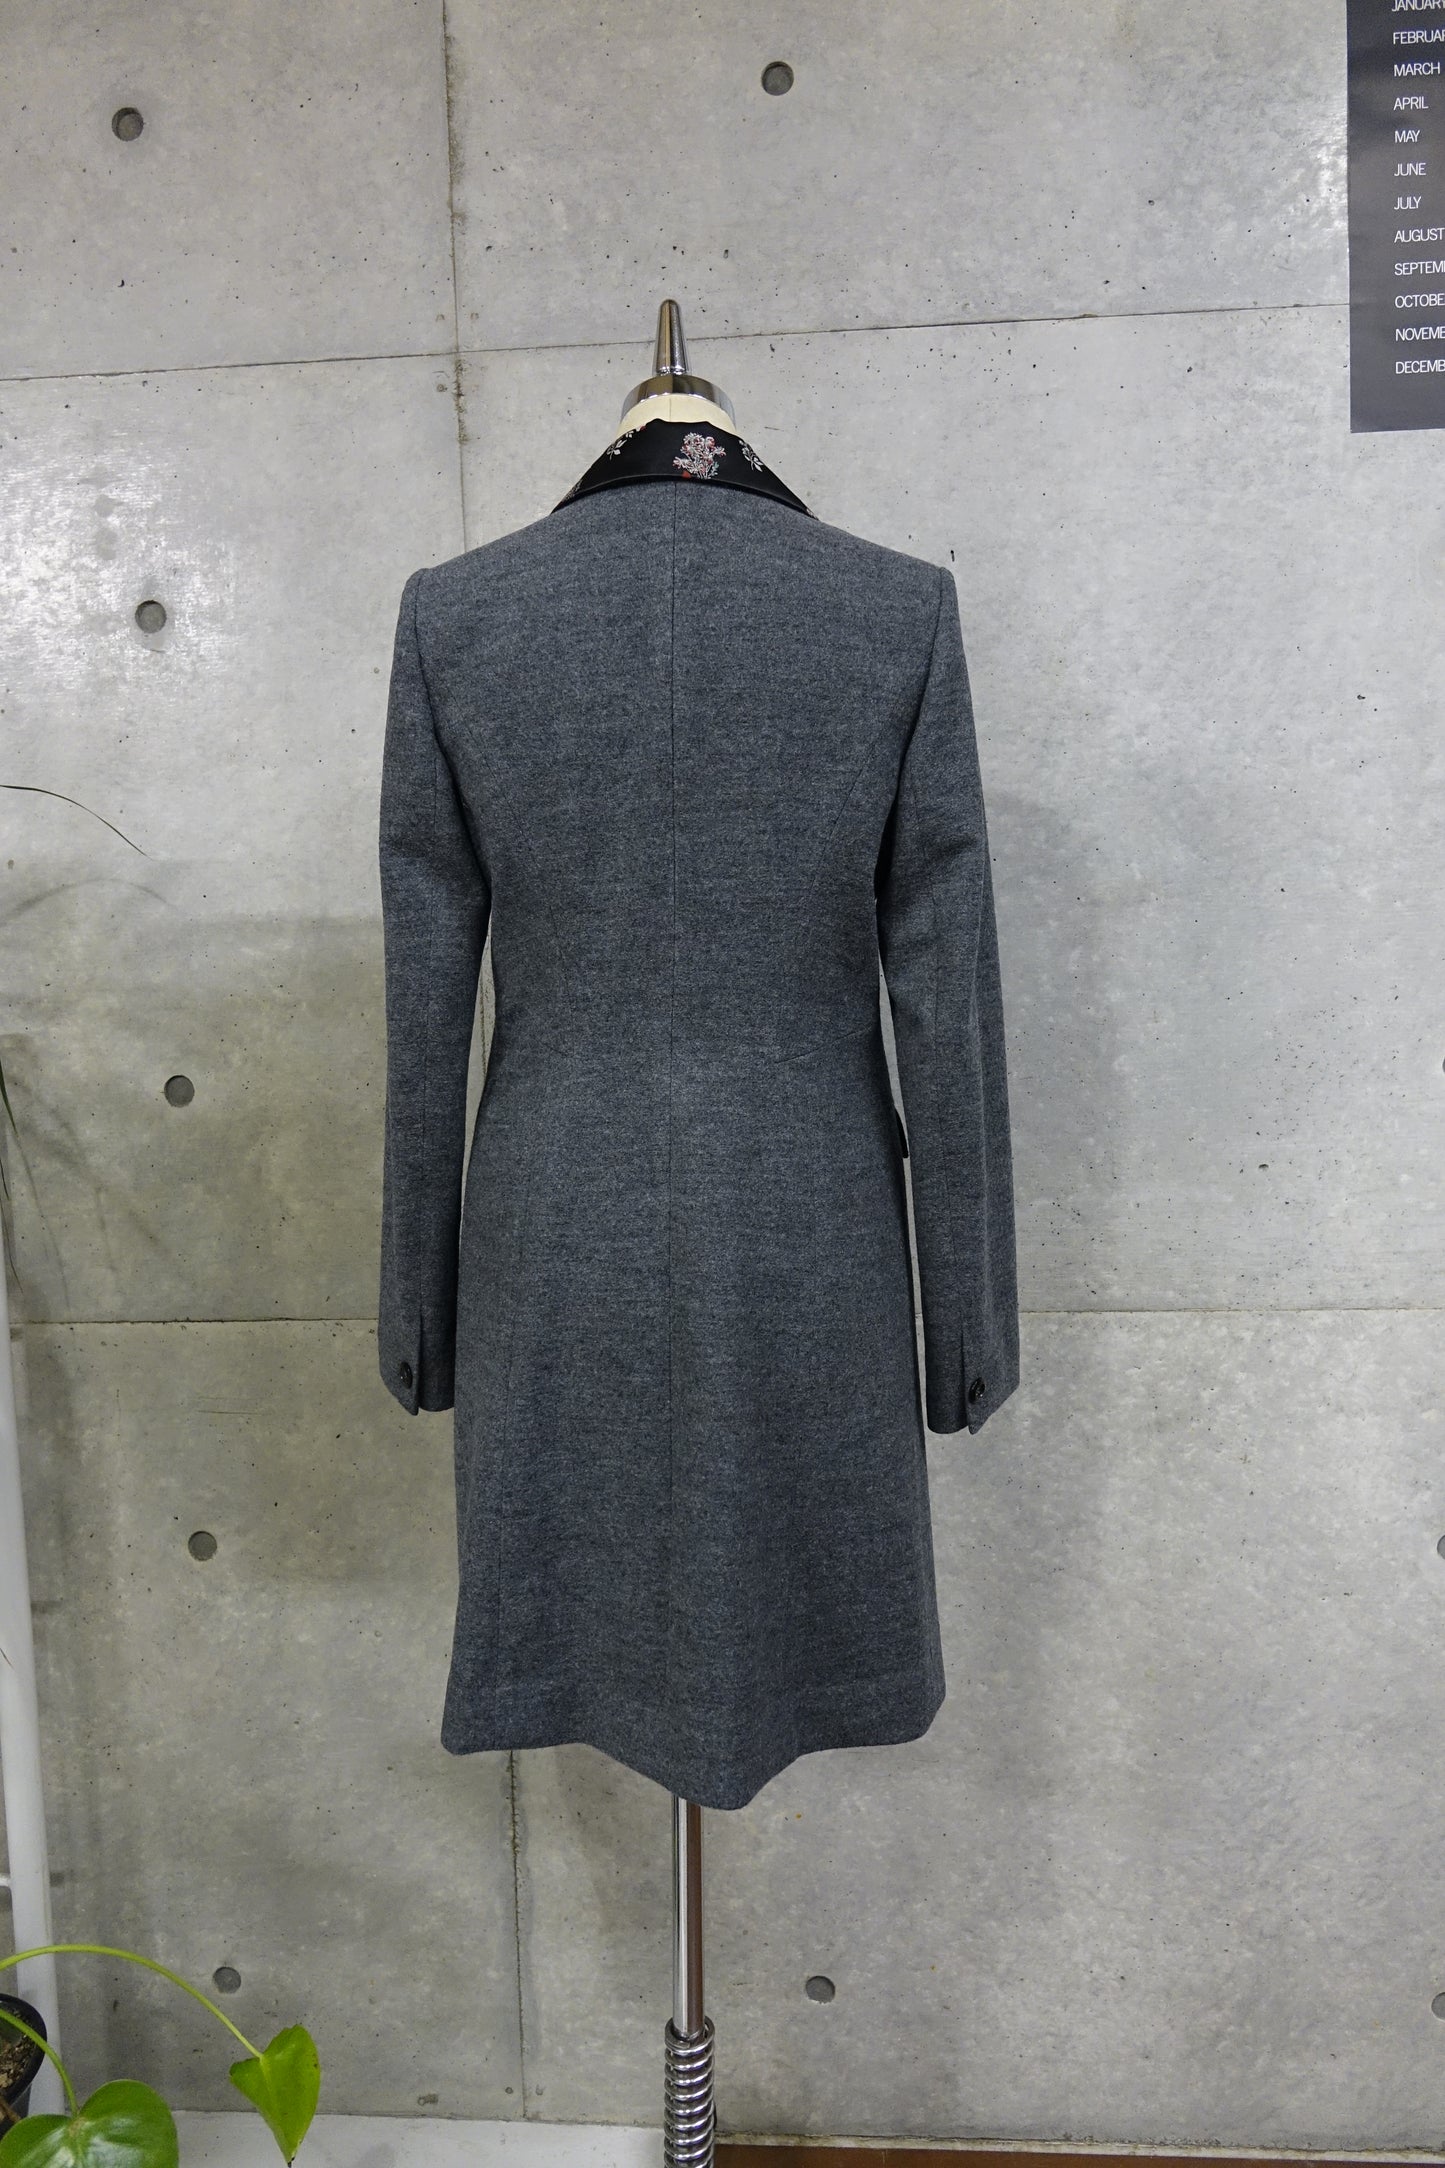 Chesterfield Coat in Charcoal Wool